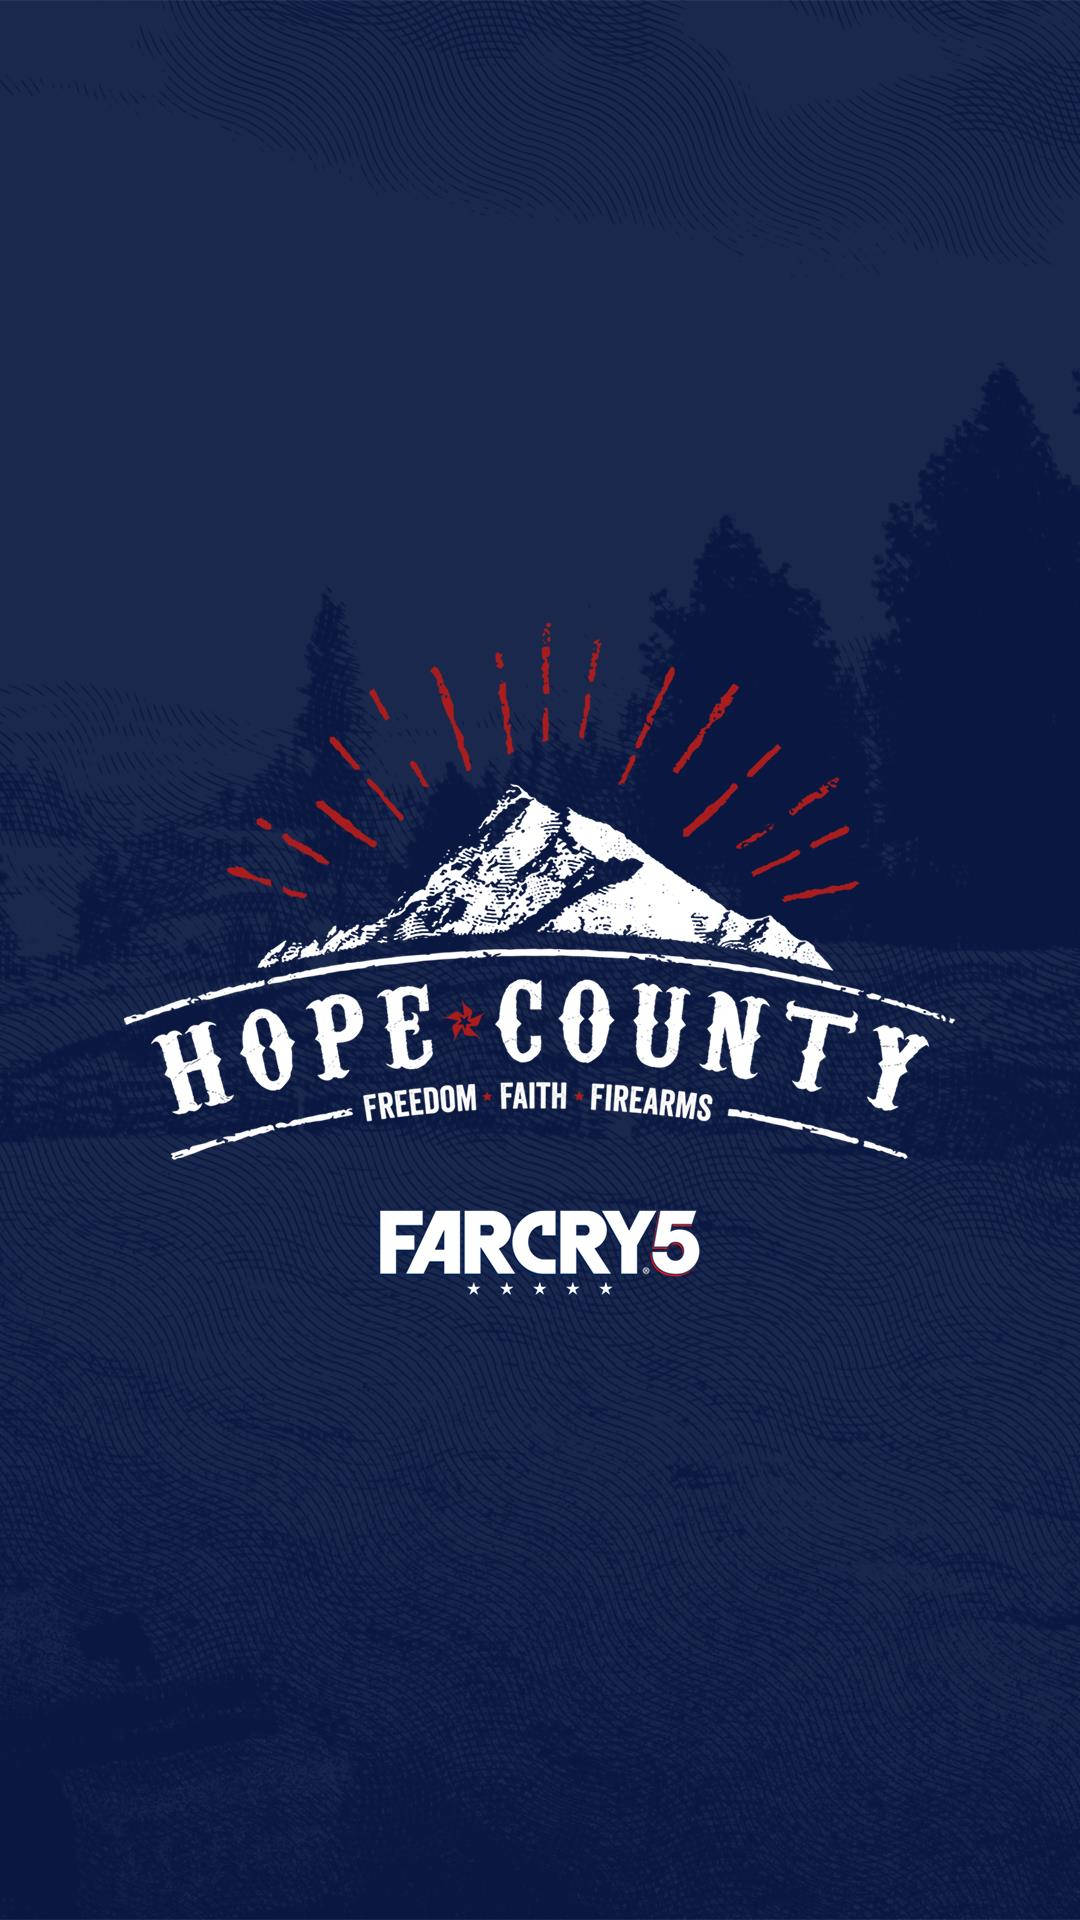 4 Far Cry 5 Live Wallpapers Animated Wallpapers  MoeWalls